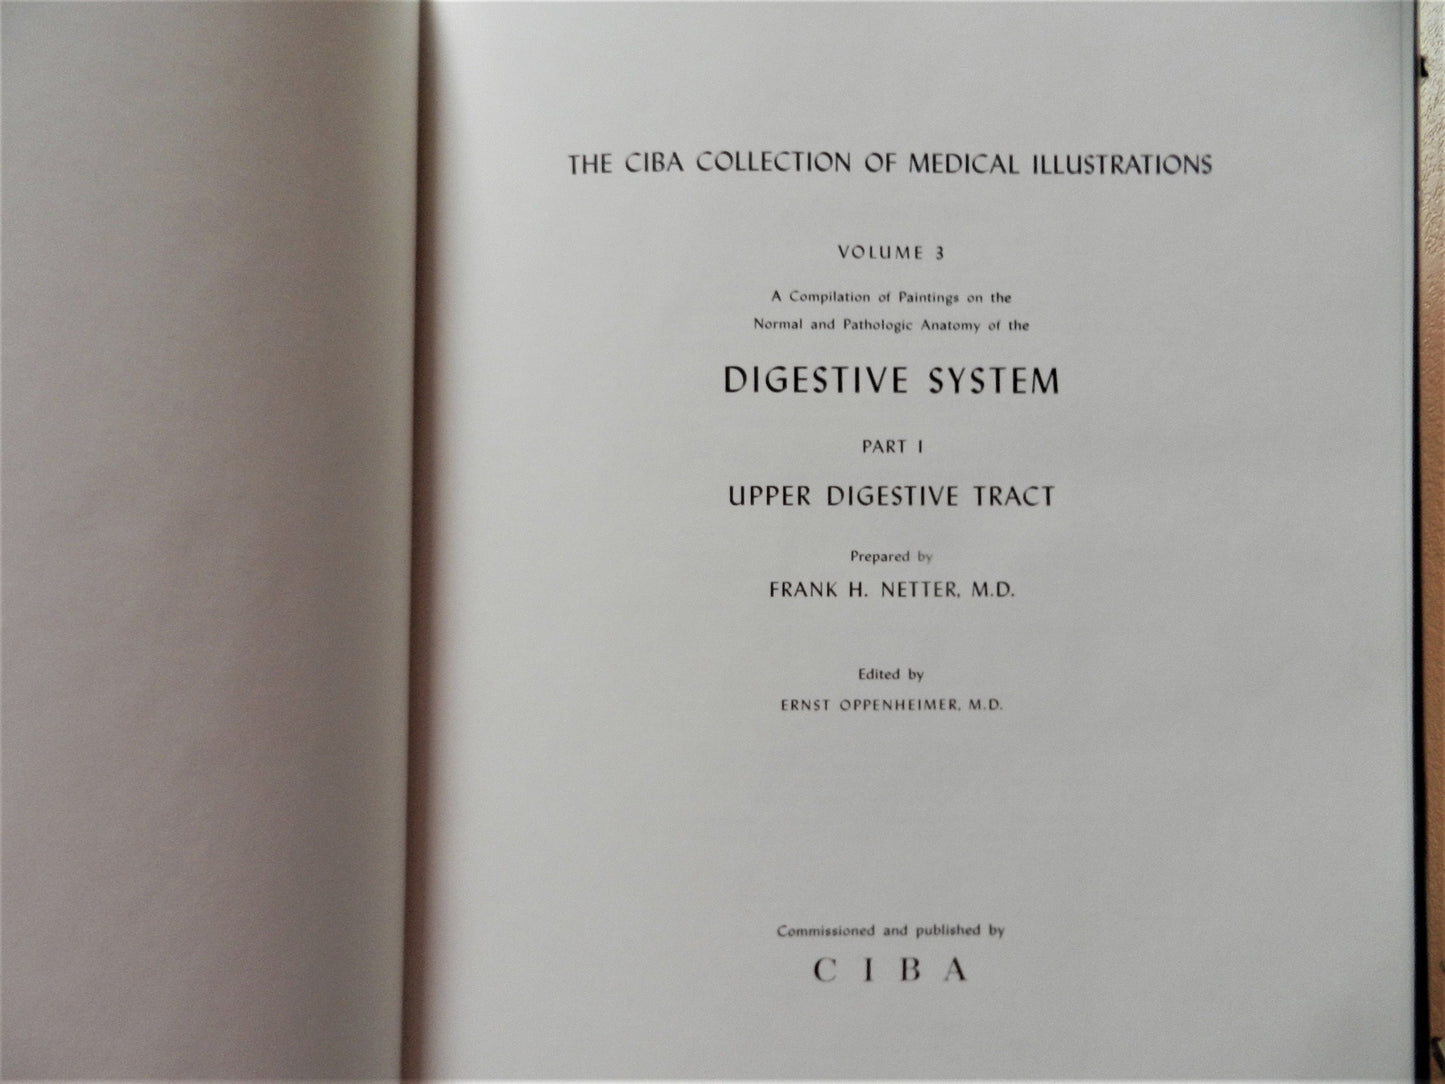 Vintage Medical Book " The Ciba Collection of Medical Illustrations - Digestive System" By Netter - 1983  2 Volumes